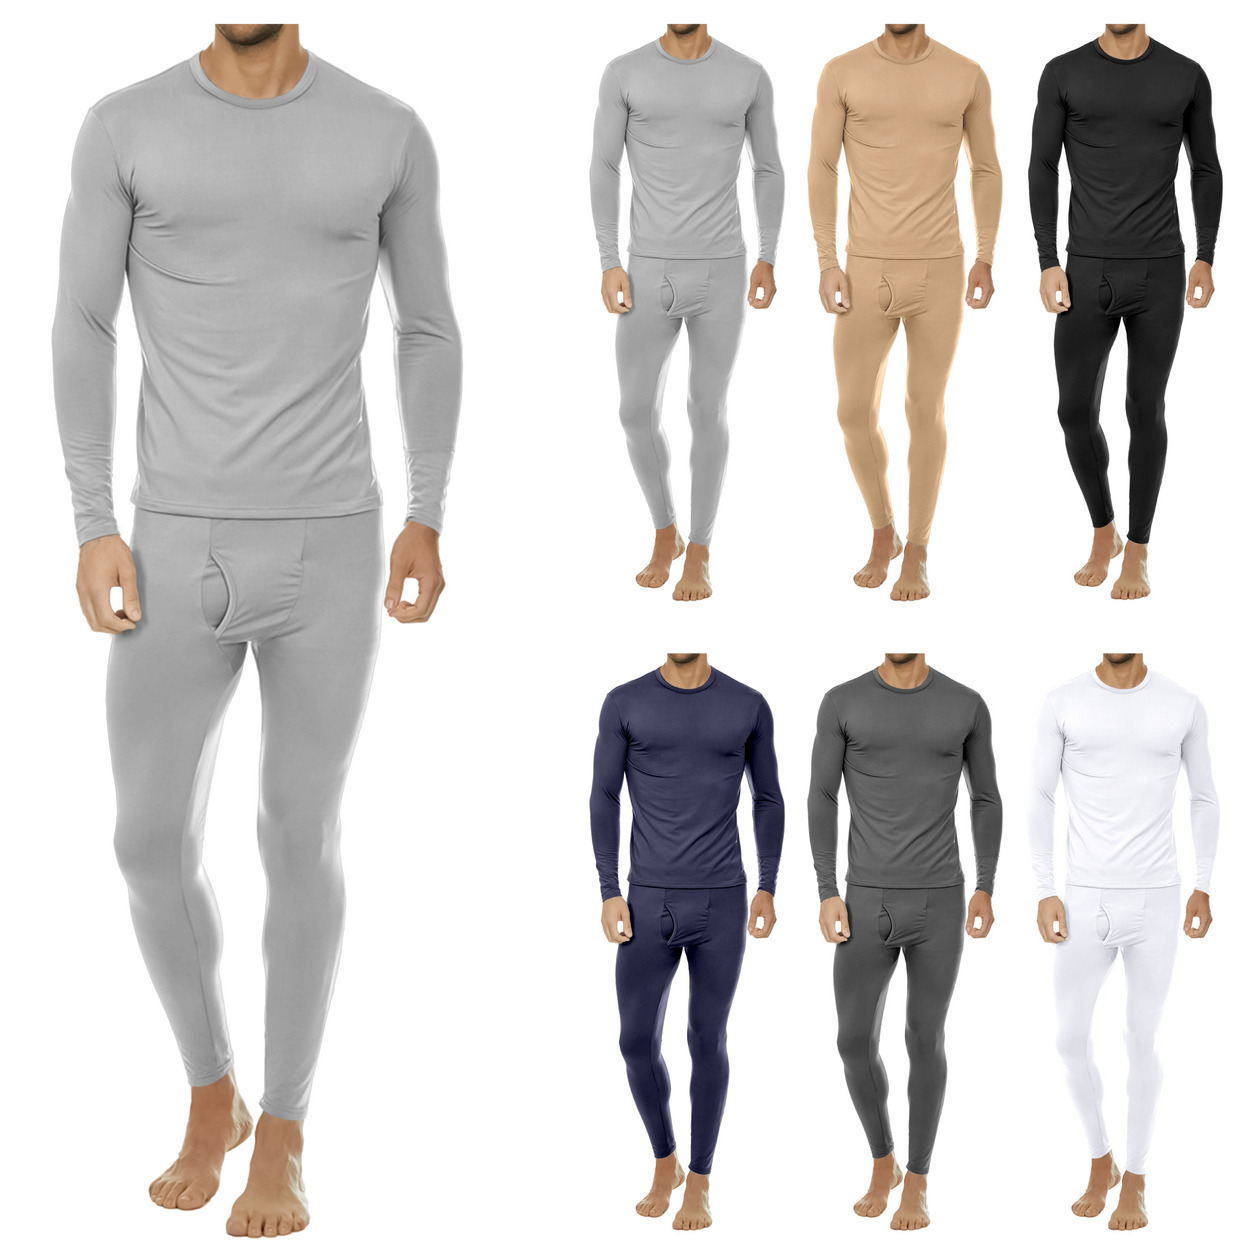 2-Sets: Men's Winter Warm Fleece Lined Thermal Underwear Set For Cold Weather - Grey&grey, X-large